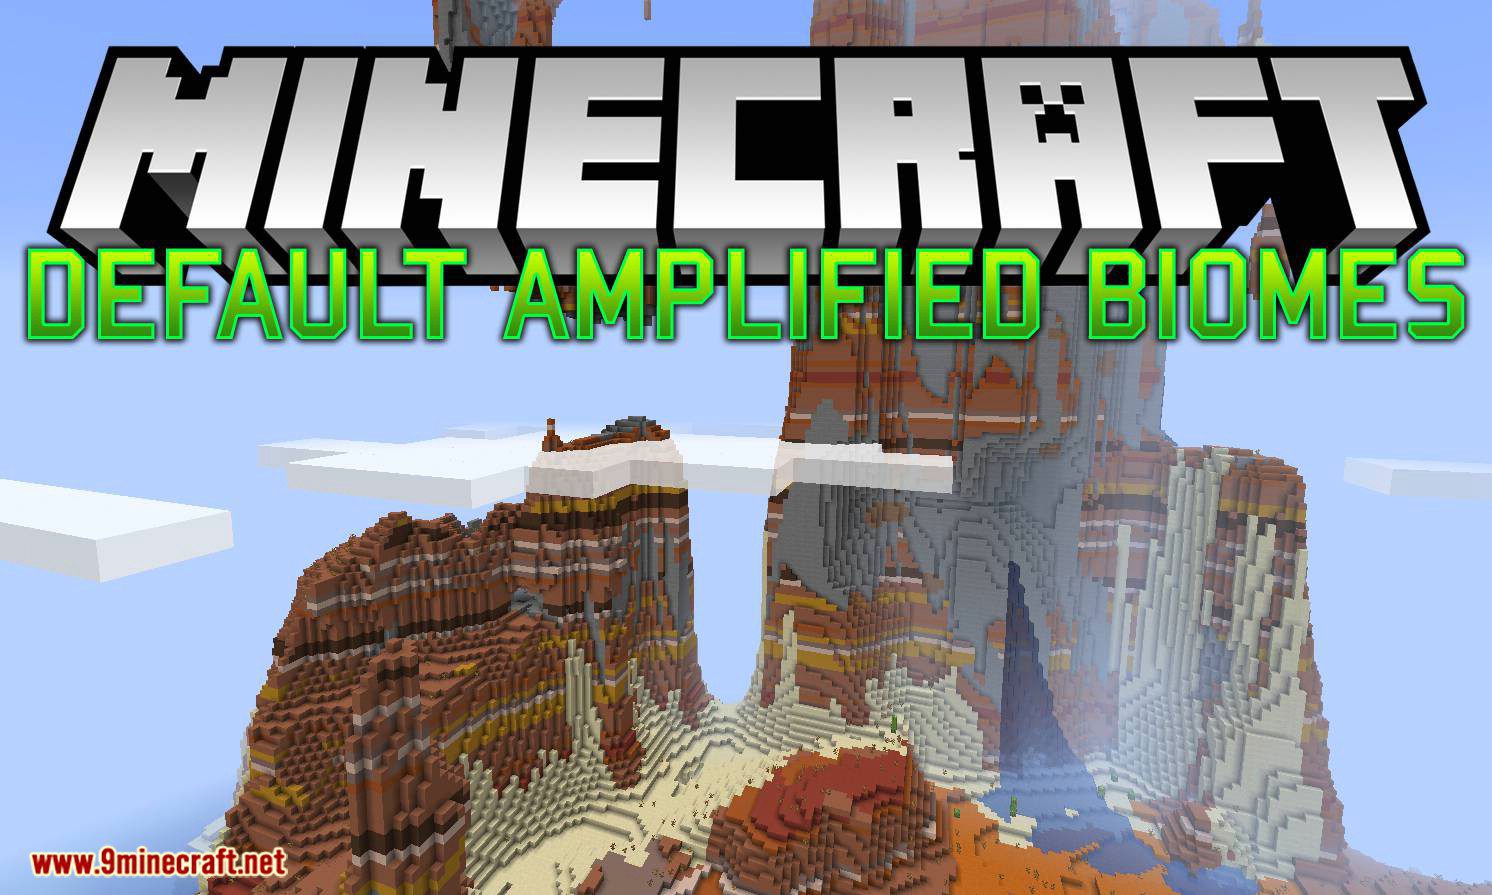 Default Amplified Biomes Mod 1.15.2, 1.14.4 (Customizable Amplfied Vanilla Biomes) 1